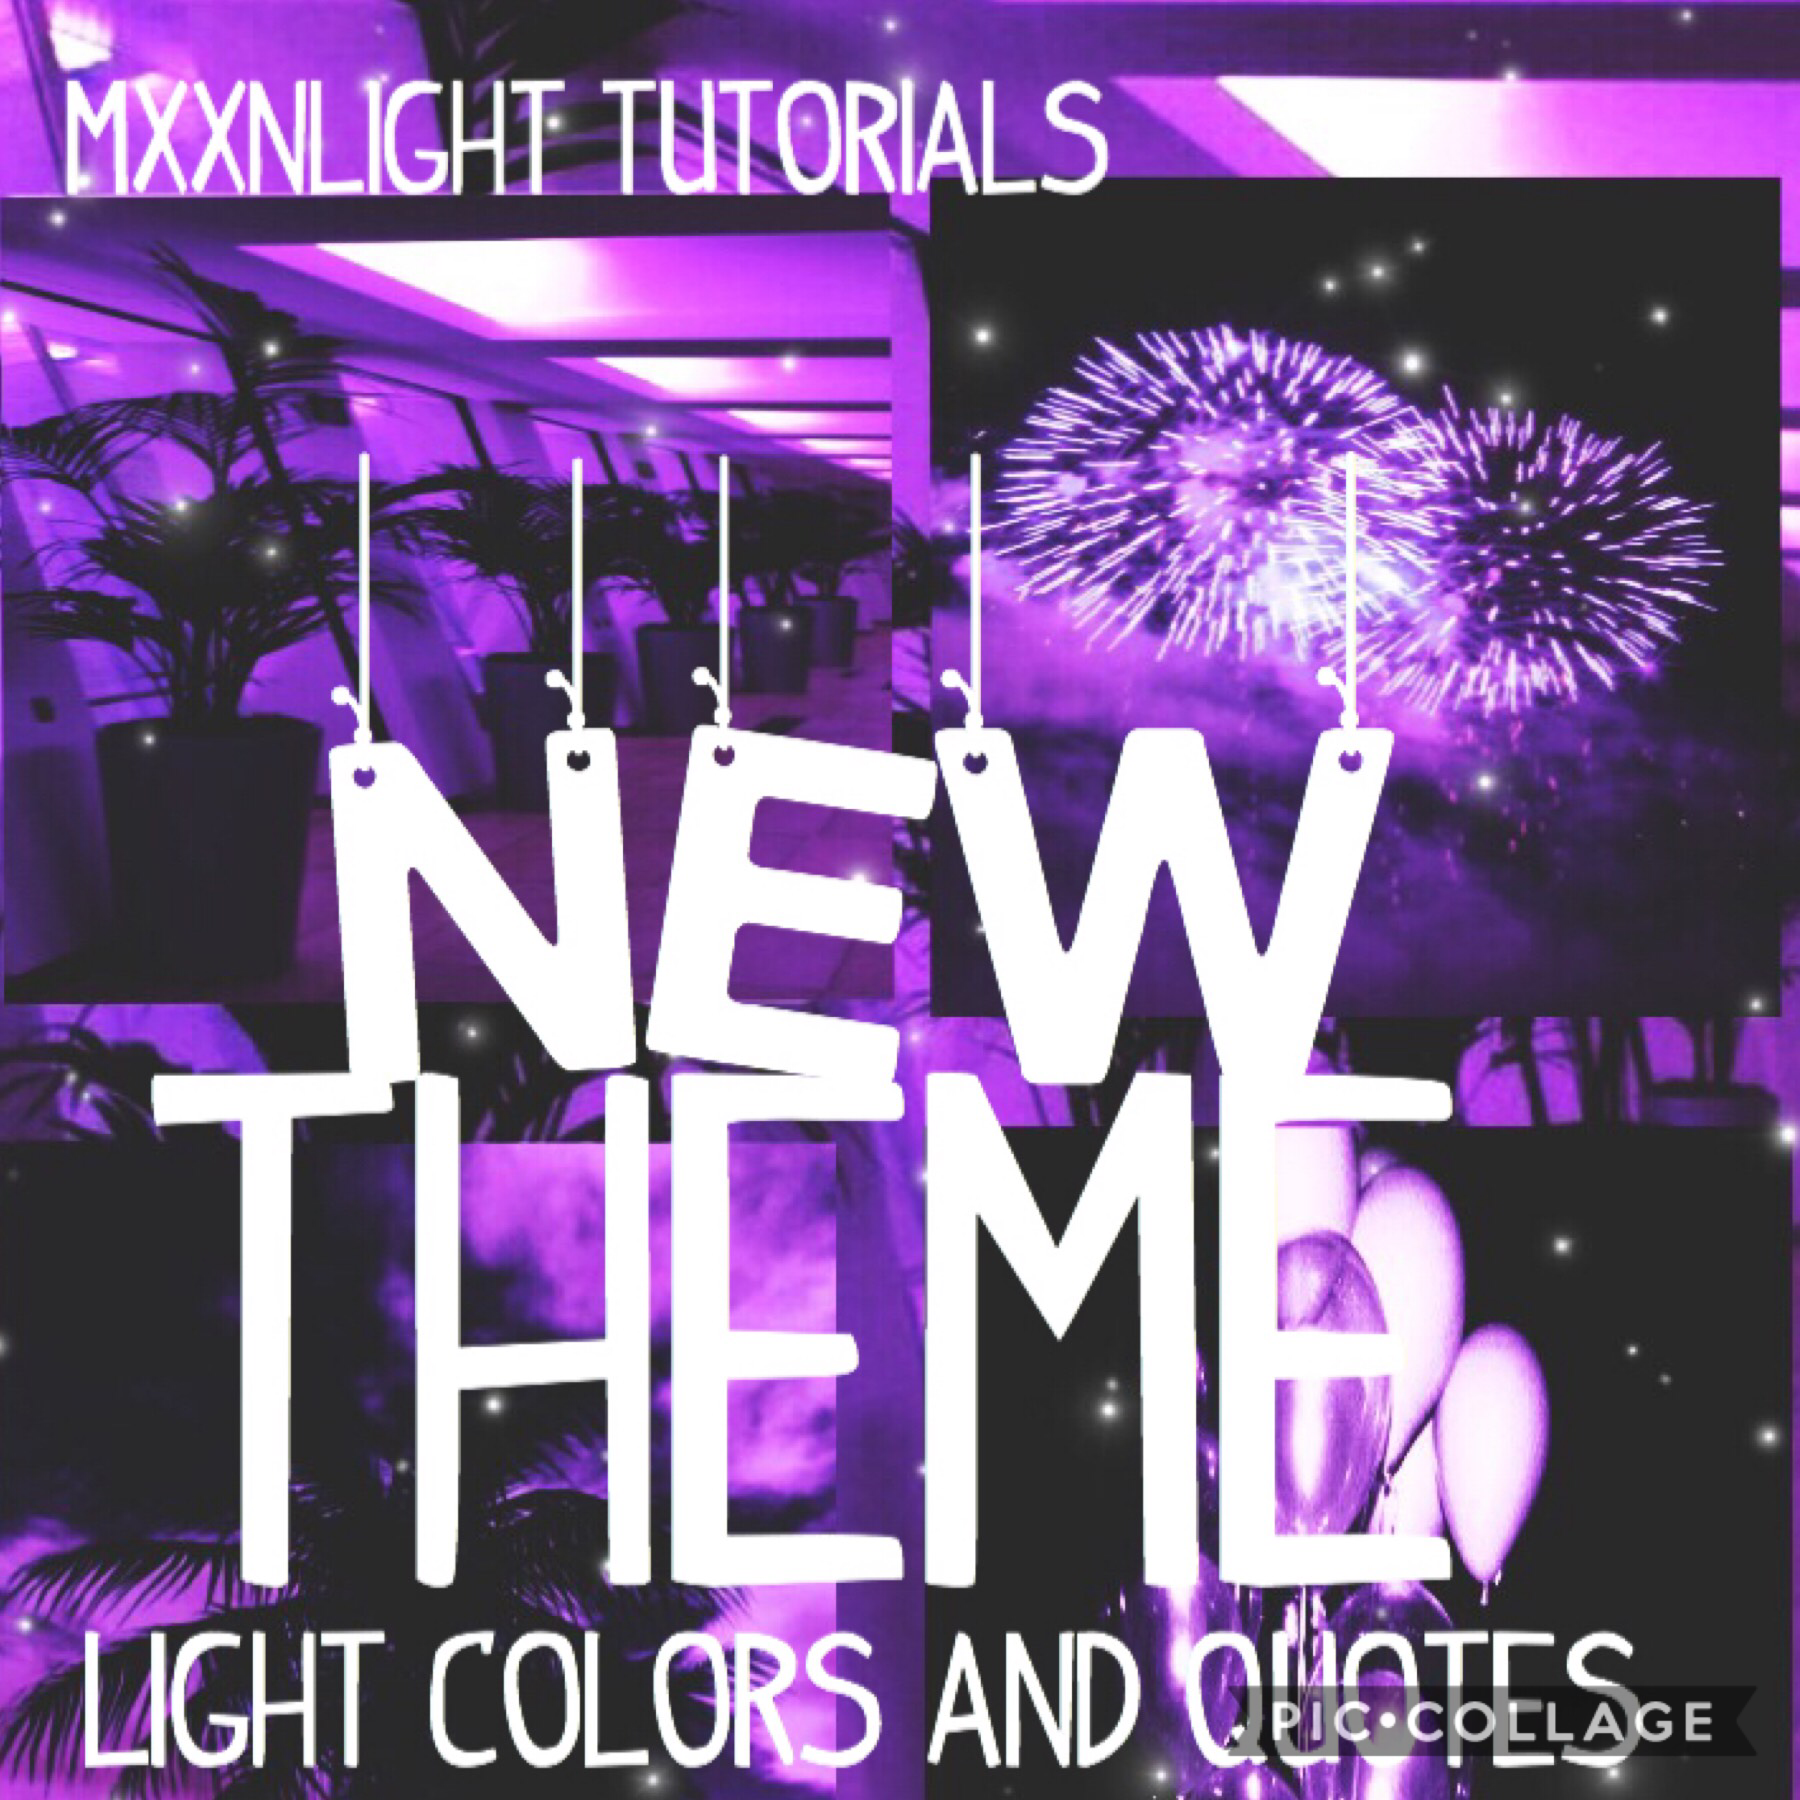 New theme and wait for my next post in a few minutes it’s important 💞💞💞
      💛mxxnlight tutorials 